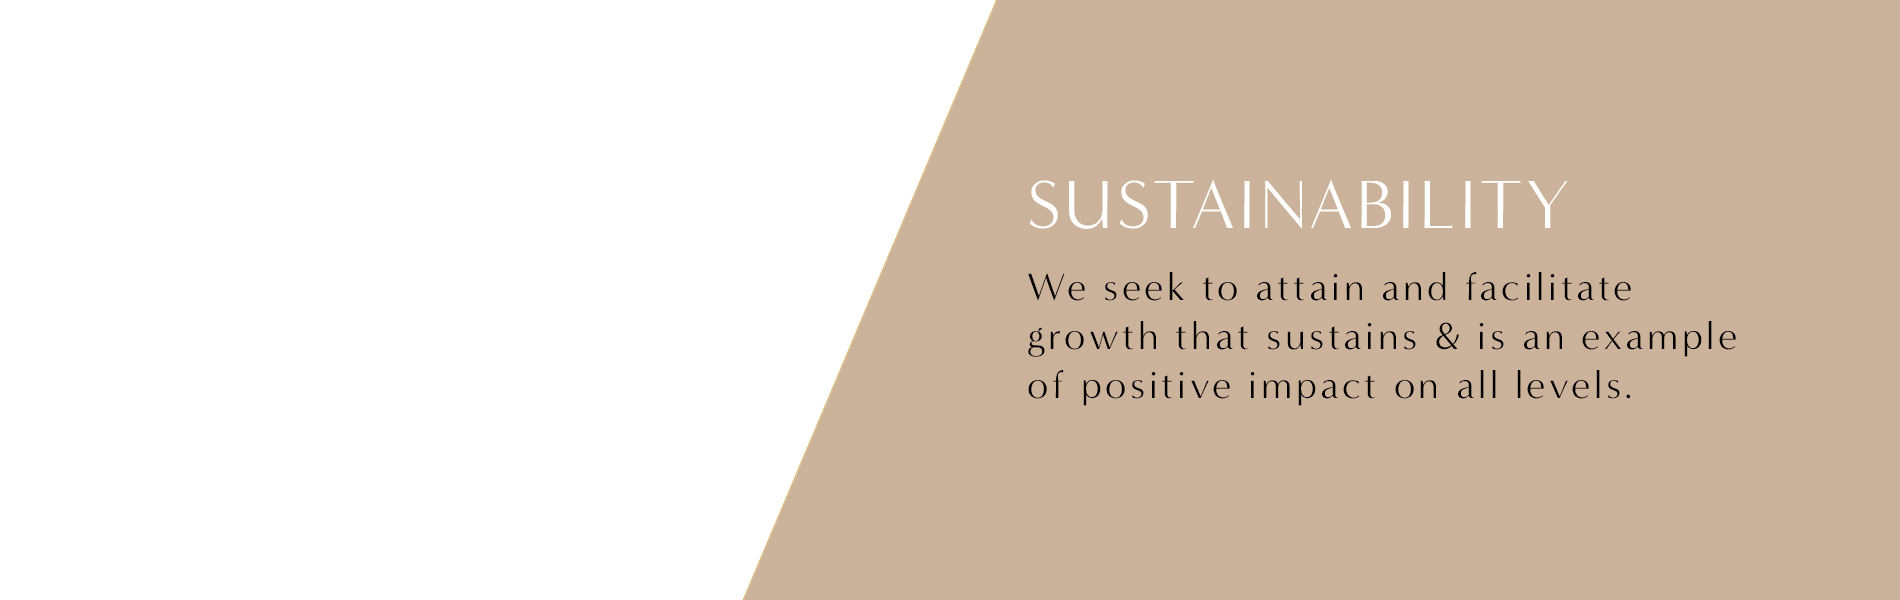 Our values slider - Sustainability